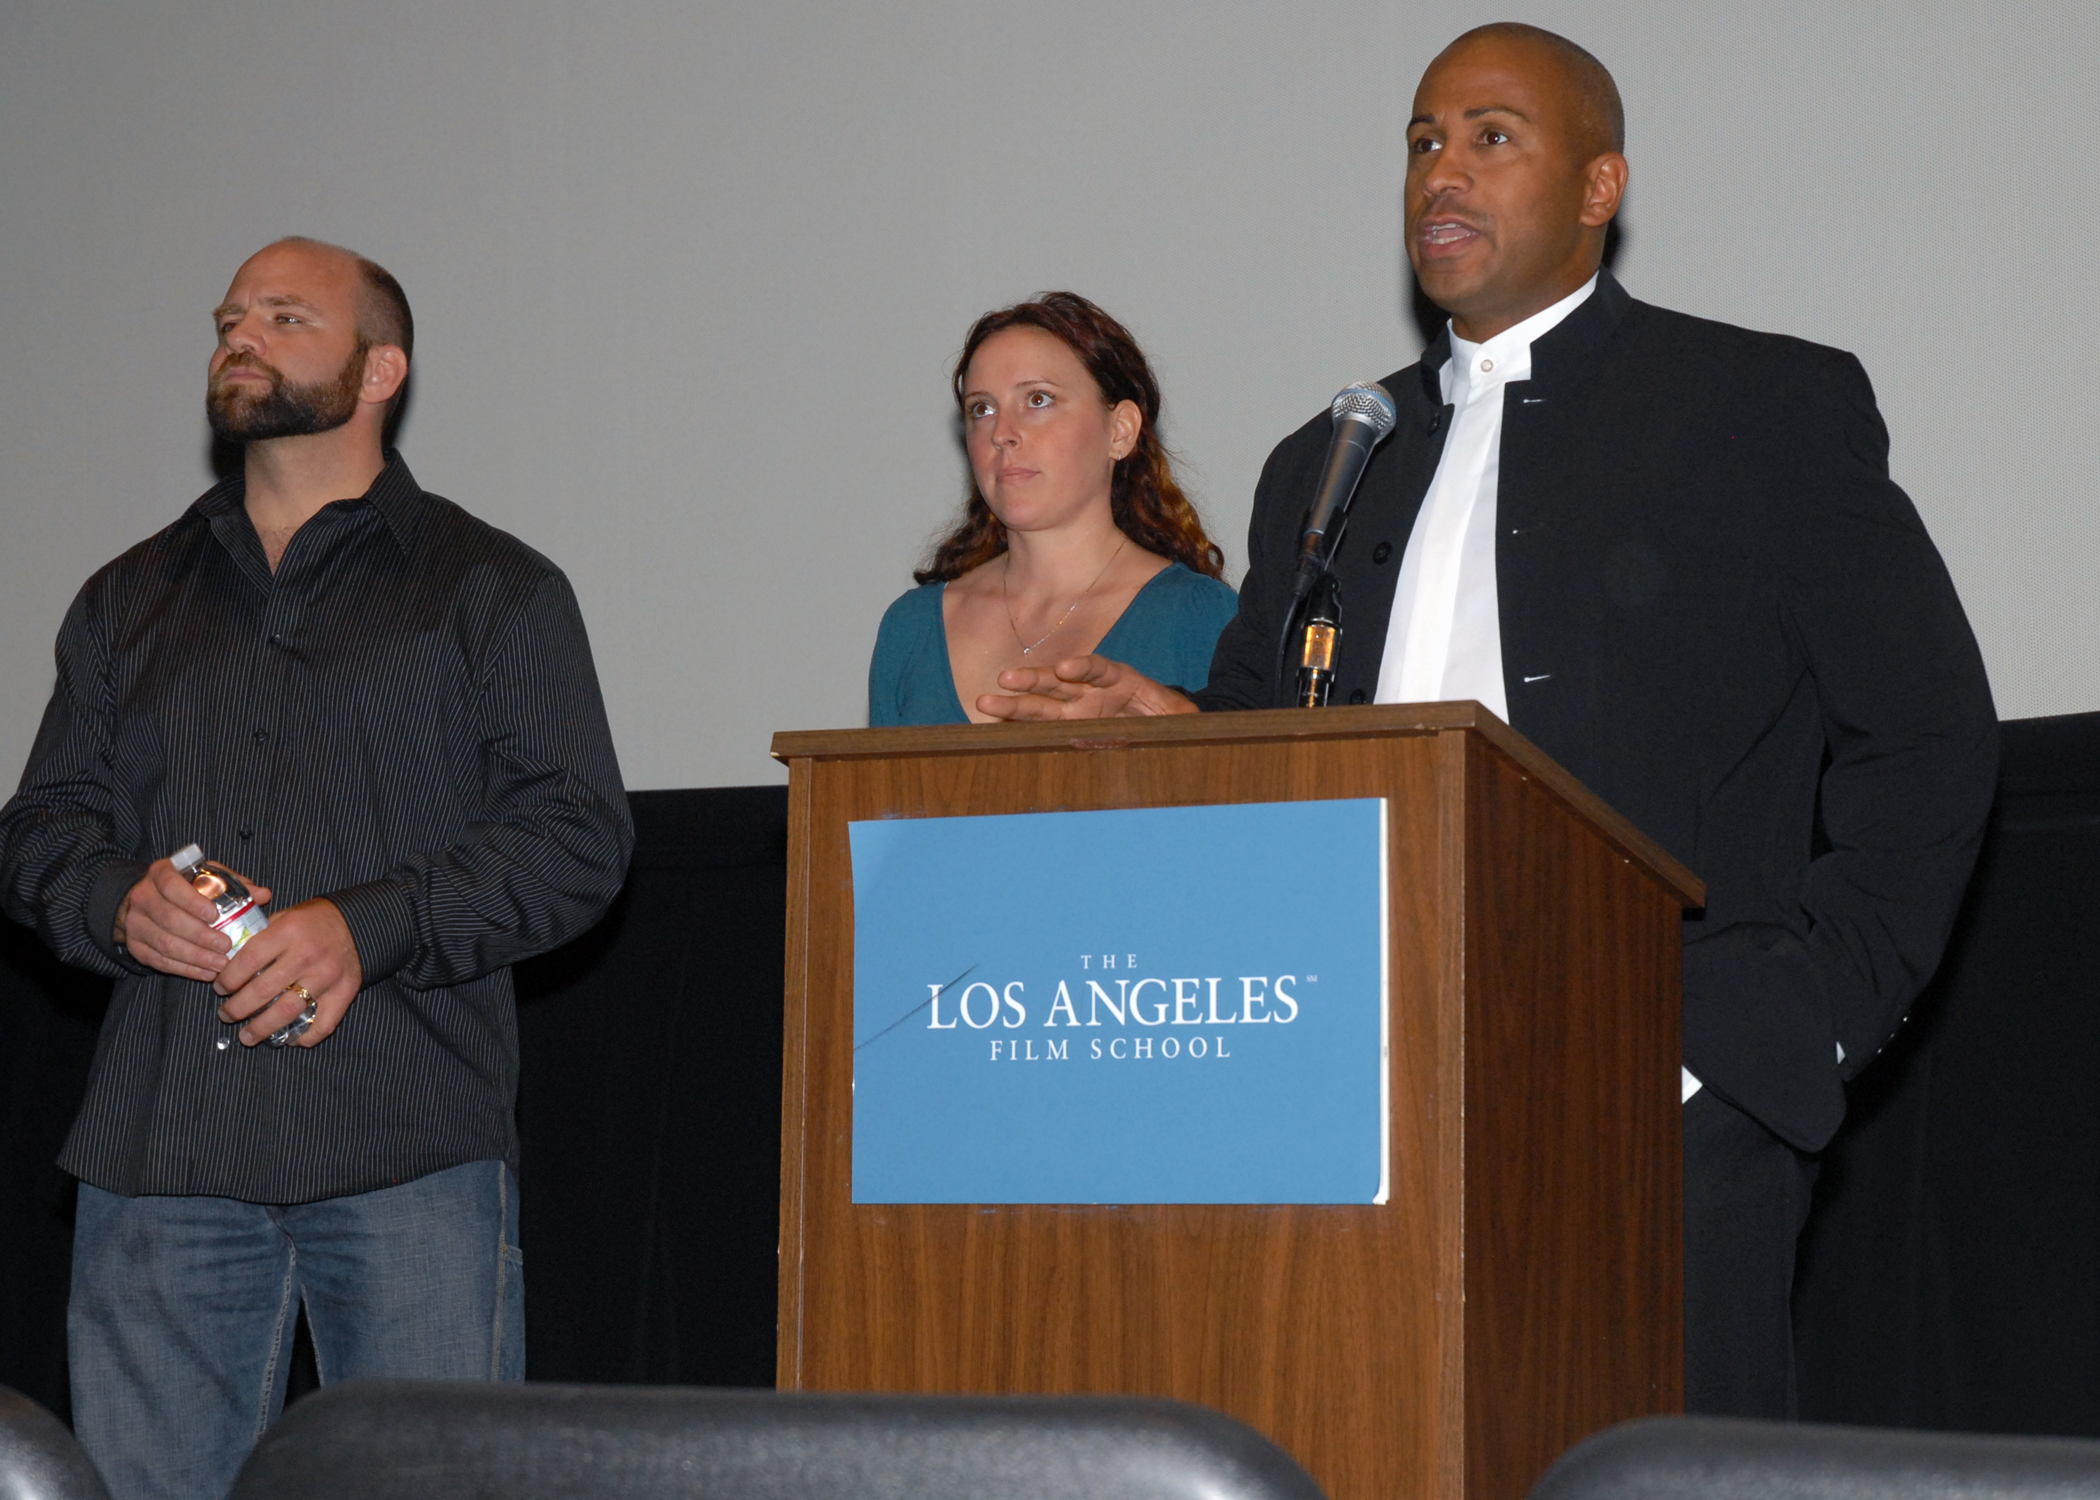 Julian introduces his film, 'Journey to Sundance' at a focus screening at the Los Angeles Film School. Associate producers Bill Jacobson and Jennifer Sorenson join him on this special night.